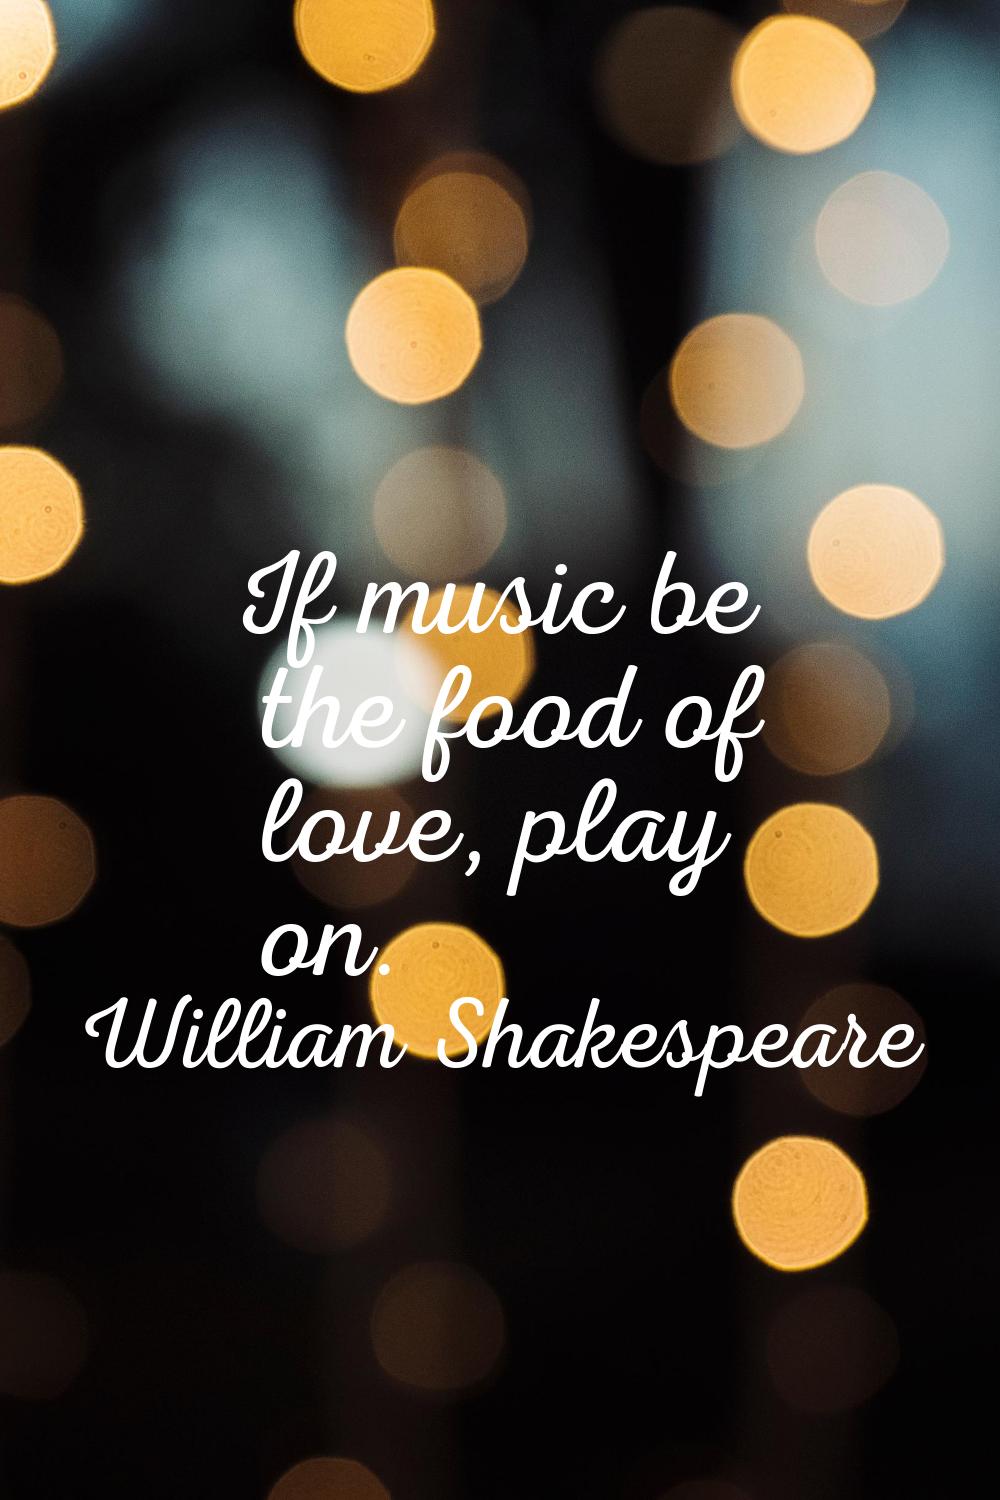 If music be the food of love, play on.